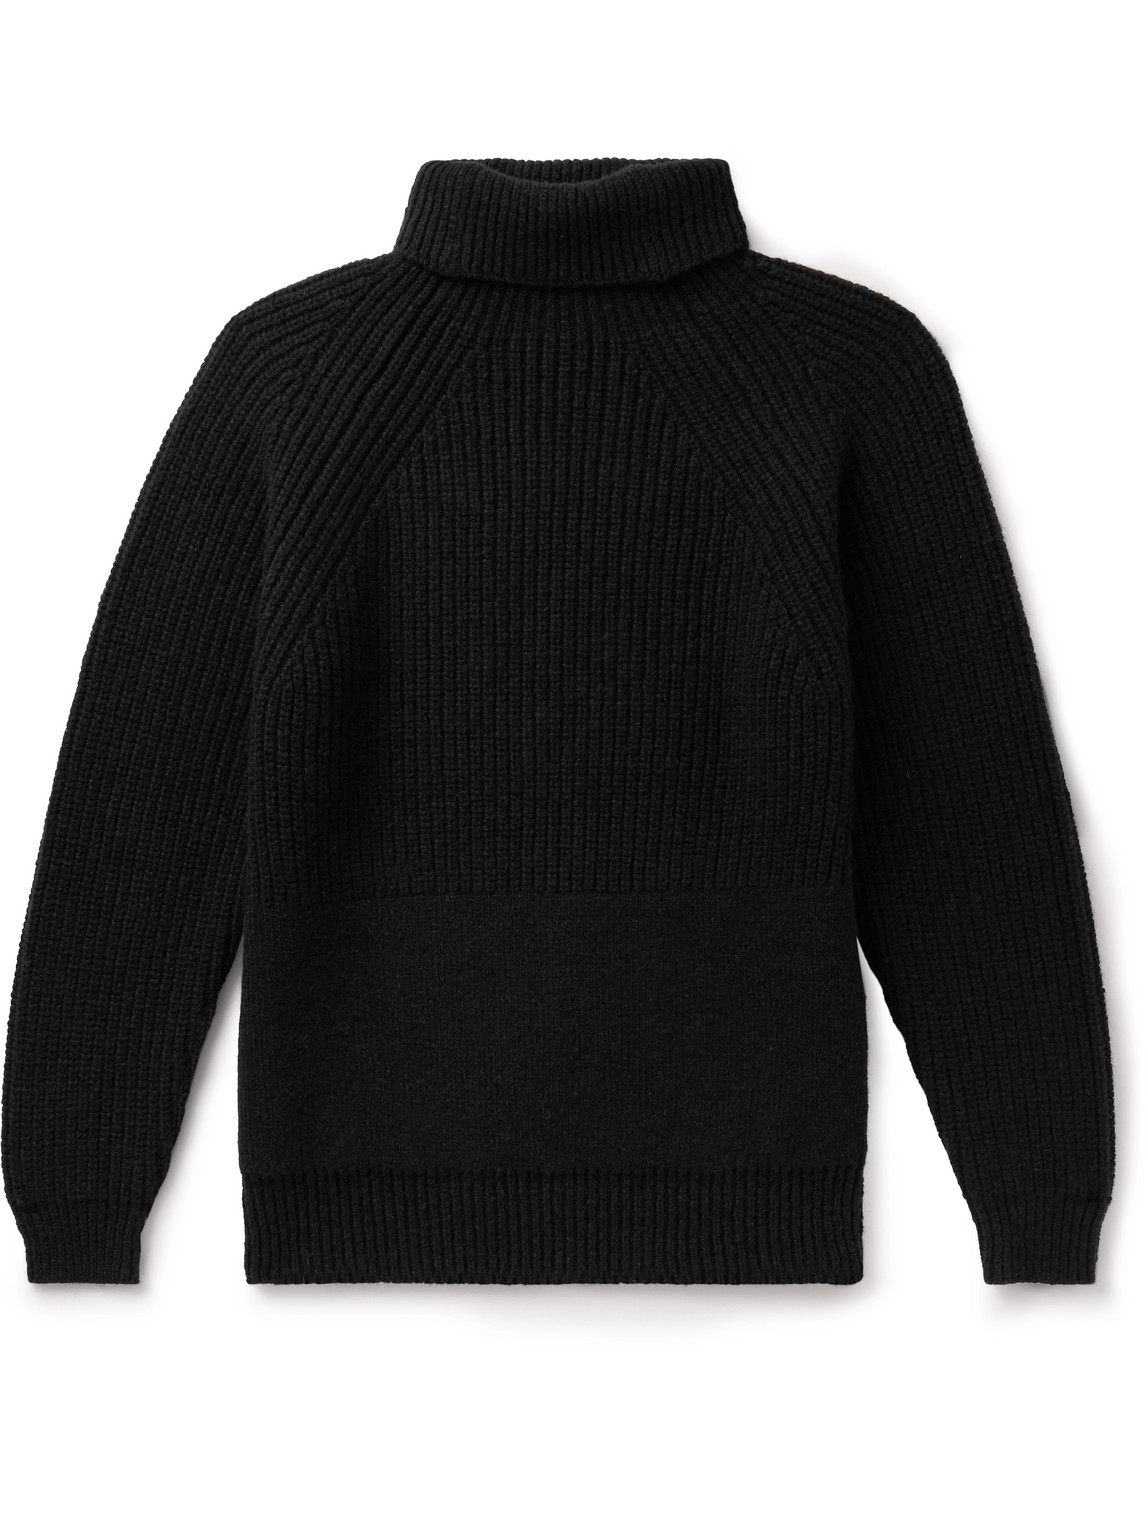 Inis Meáin Ribbed Merino Wool and Cashmere-Blend Rollneck Sweater